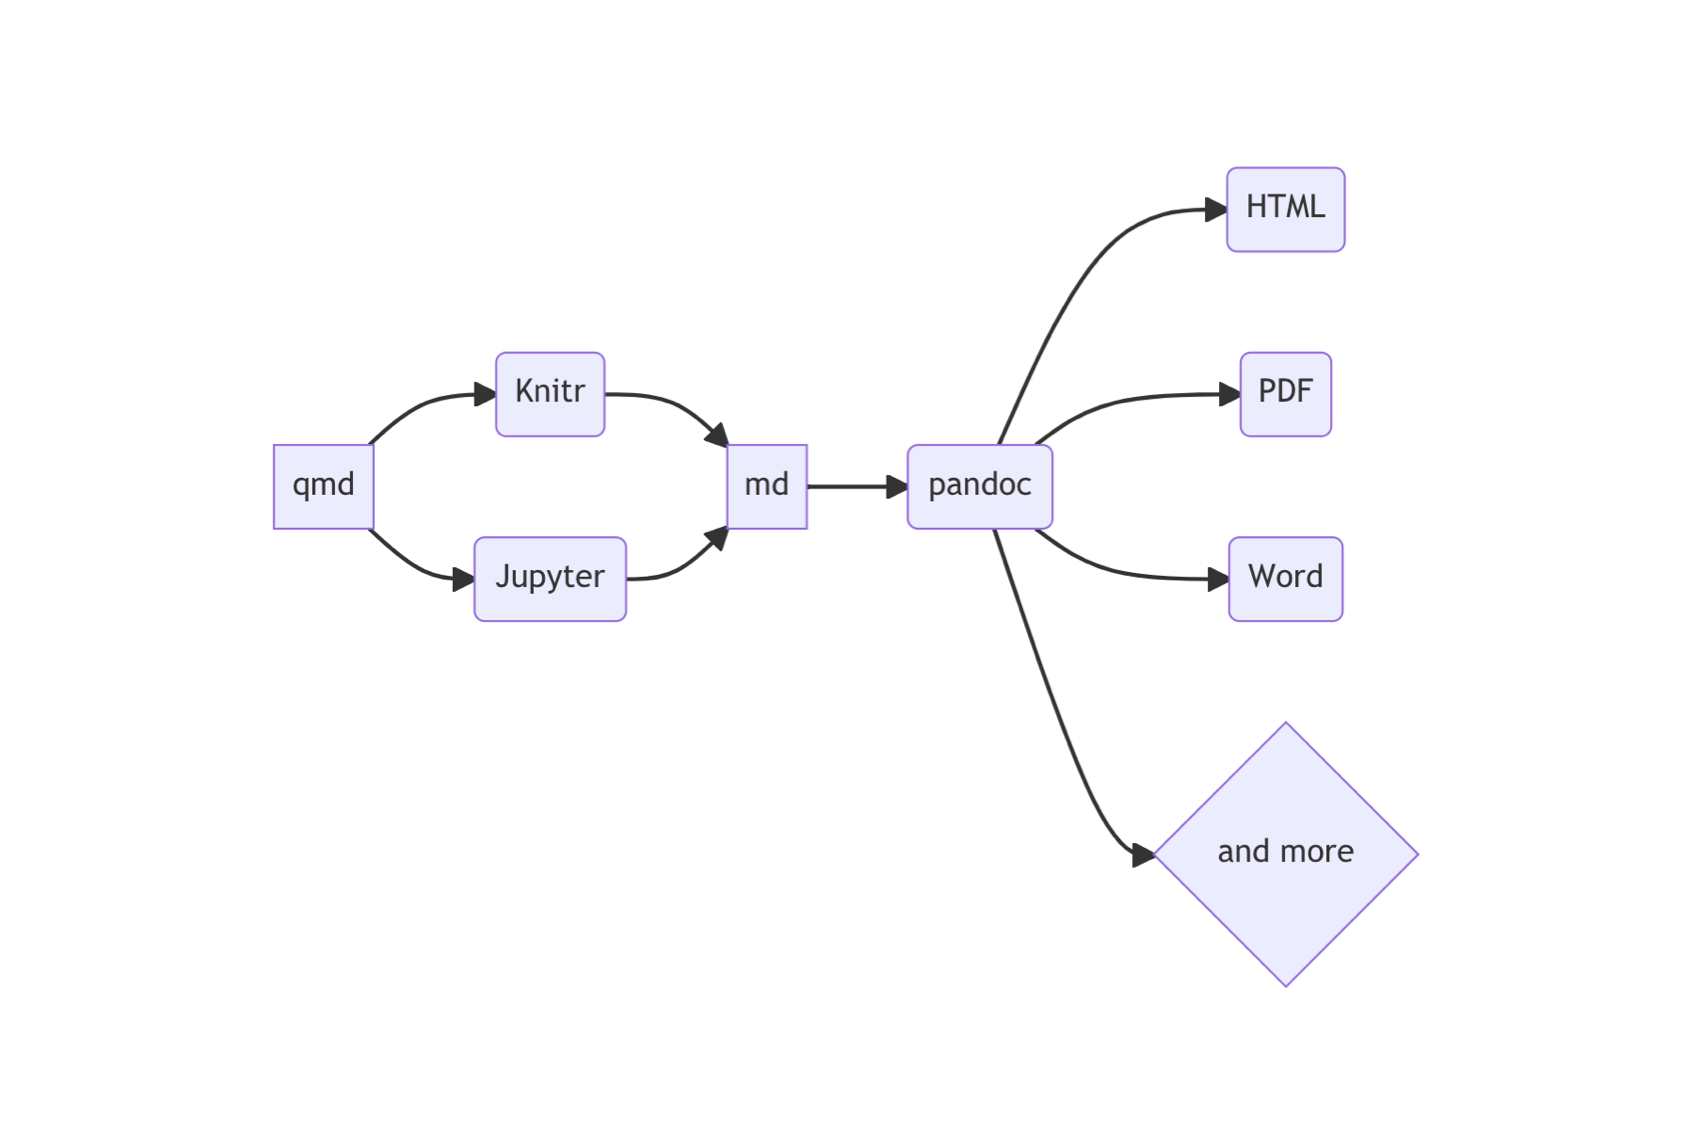 Diagram depicting how Quarto orchestrates rendering of documents: start with a qmd file, use the Knitr or Jupyter engine to perform the computations and convert it to an md file, then use Pandoc to convert to various file formats including HTML, PDF, and Word.